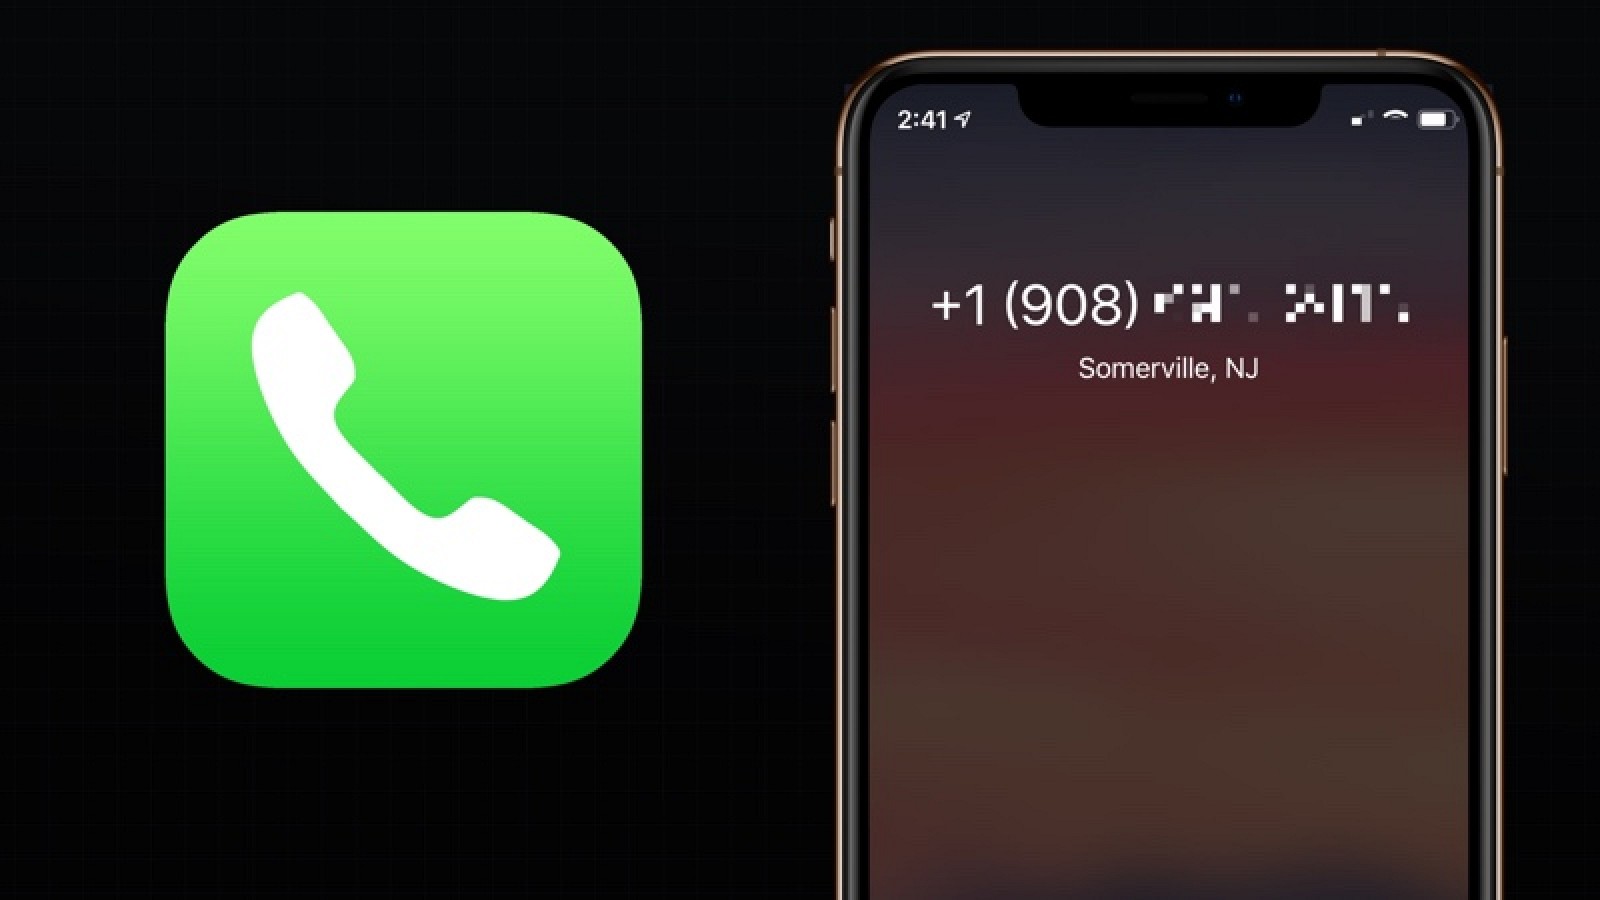 Check Out the Silence Unknown Callers Feature in iOS 13 for Blocking Spam Calls